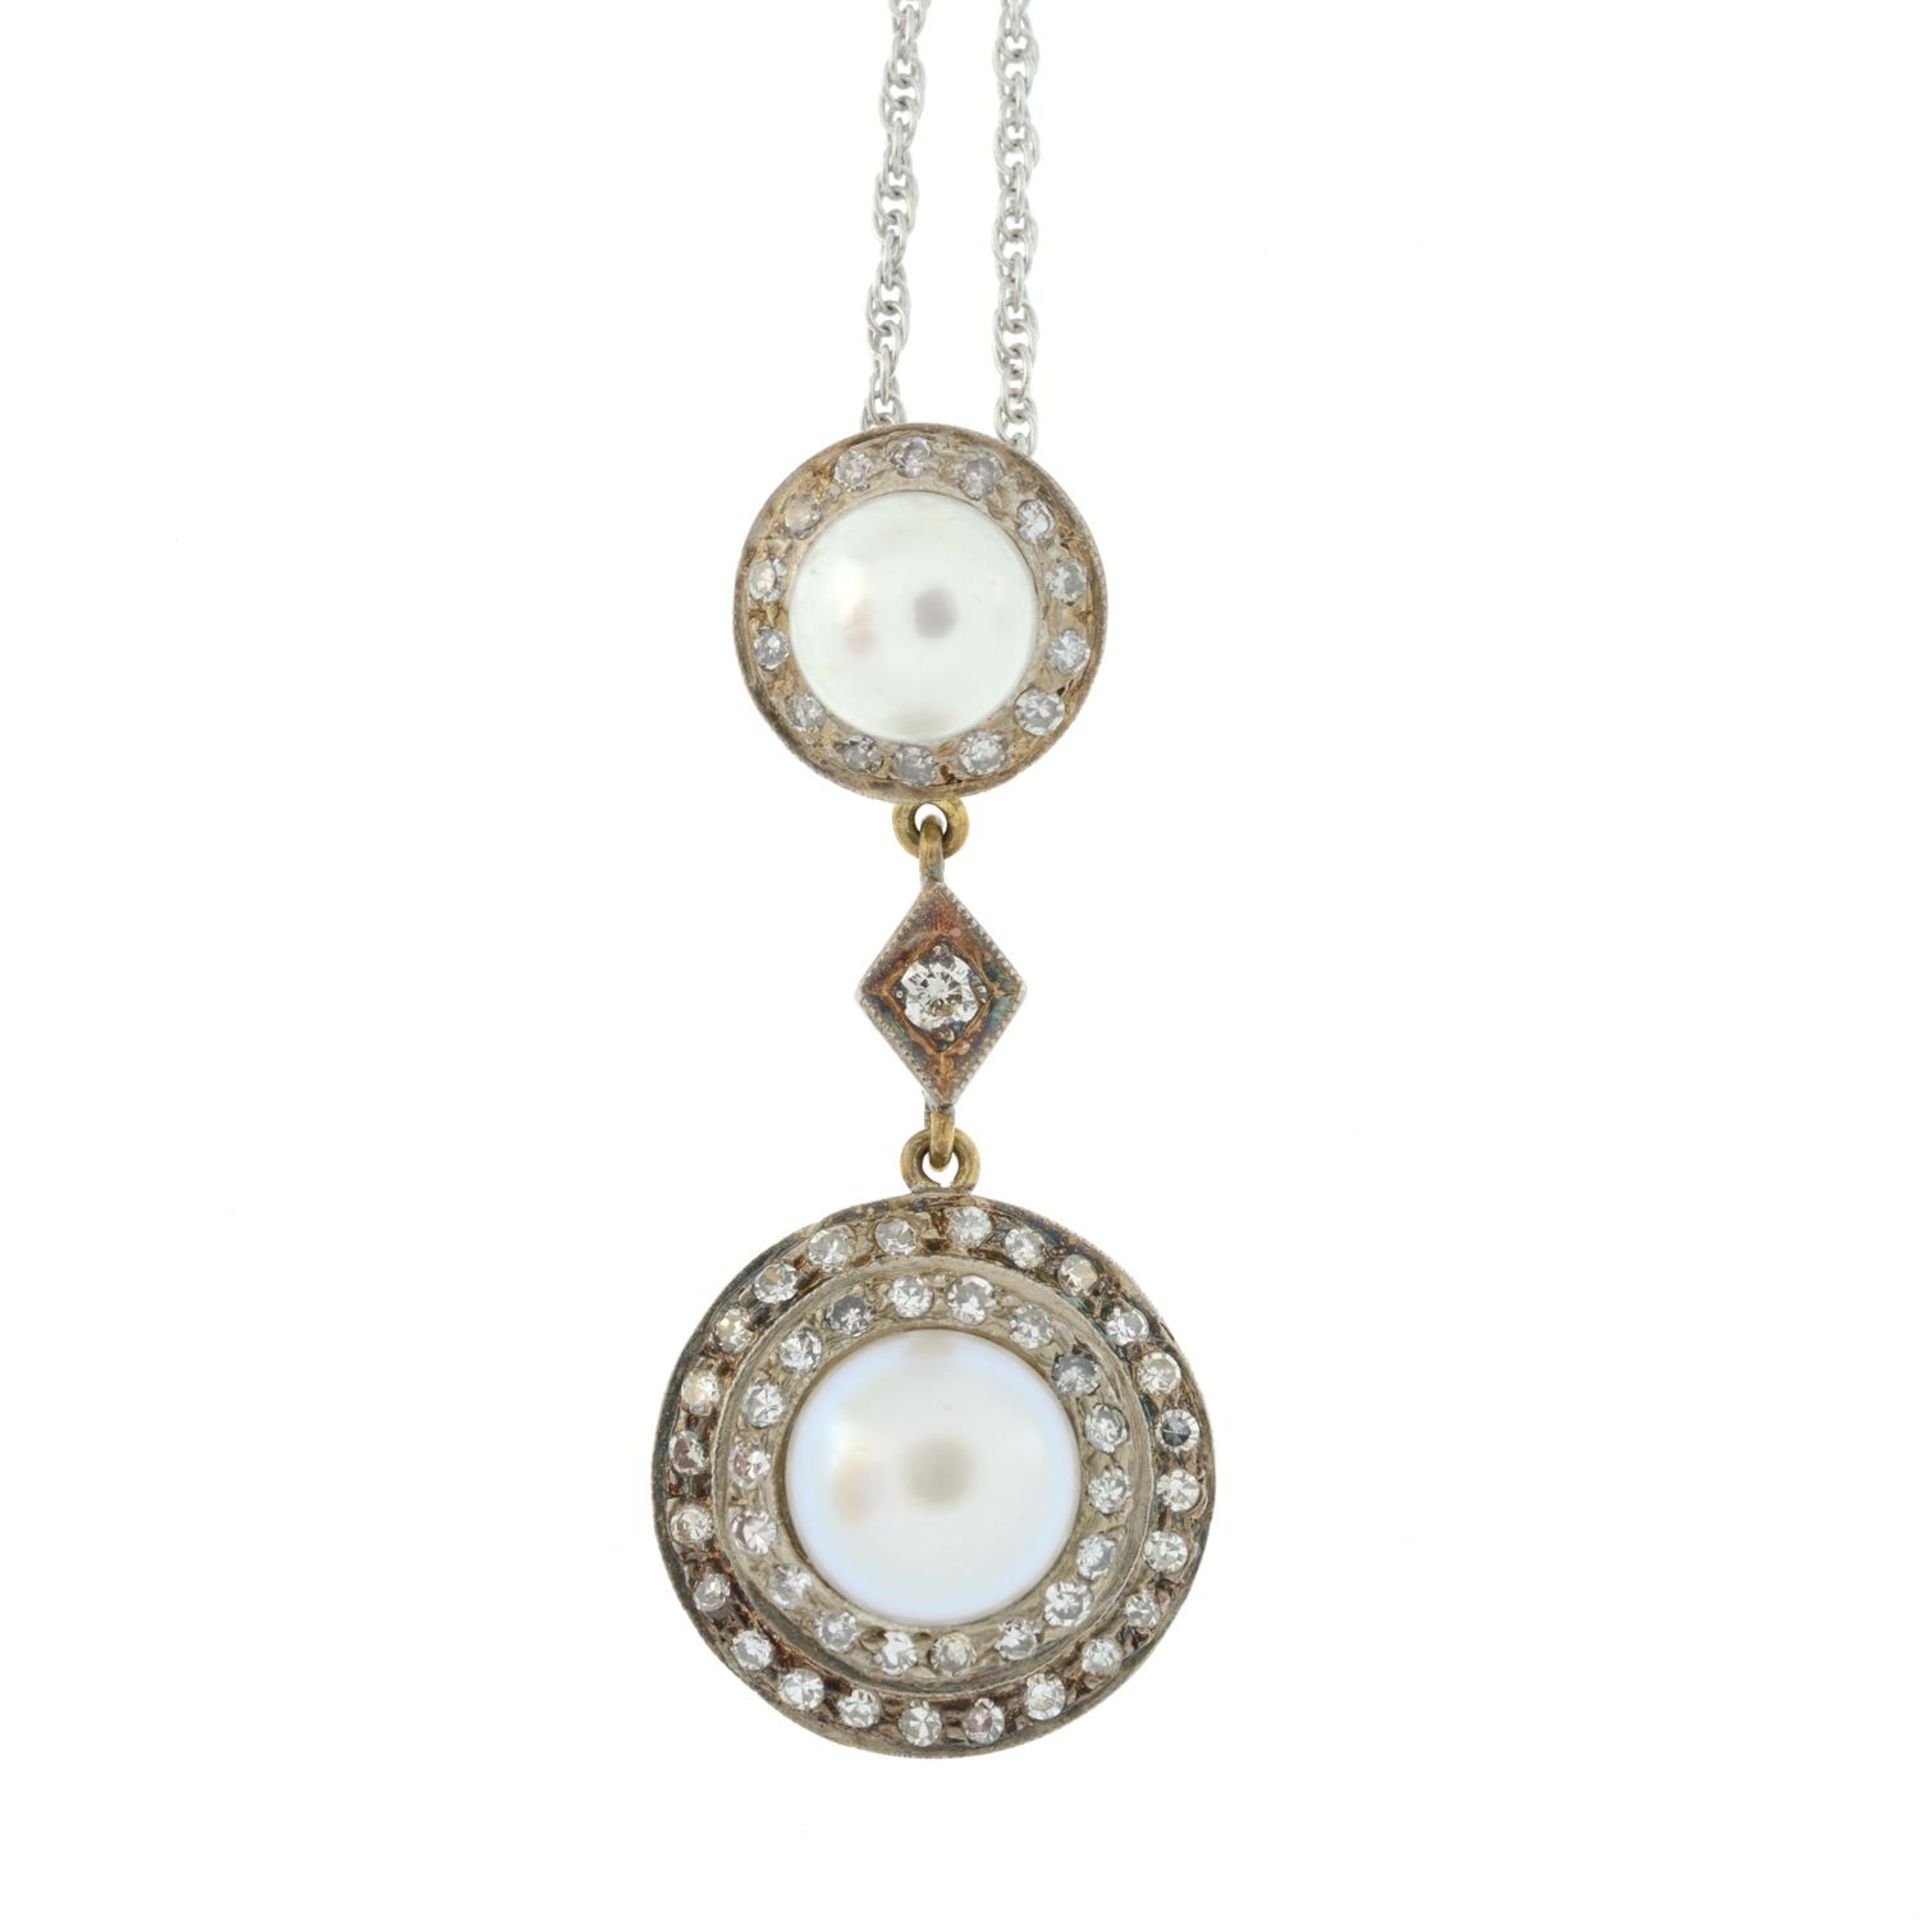 Edwardian silver & gold cultured pearl & diamond pendant, with later 18ct gold chain - Image 2 of 4